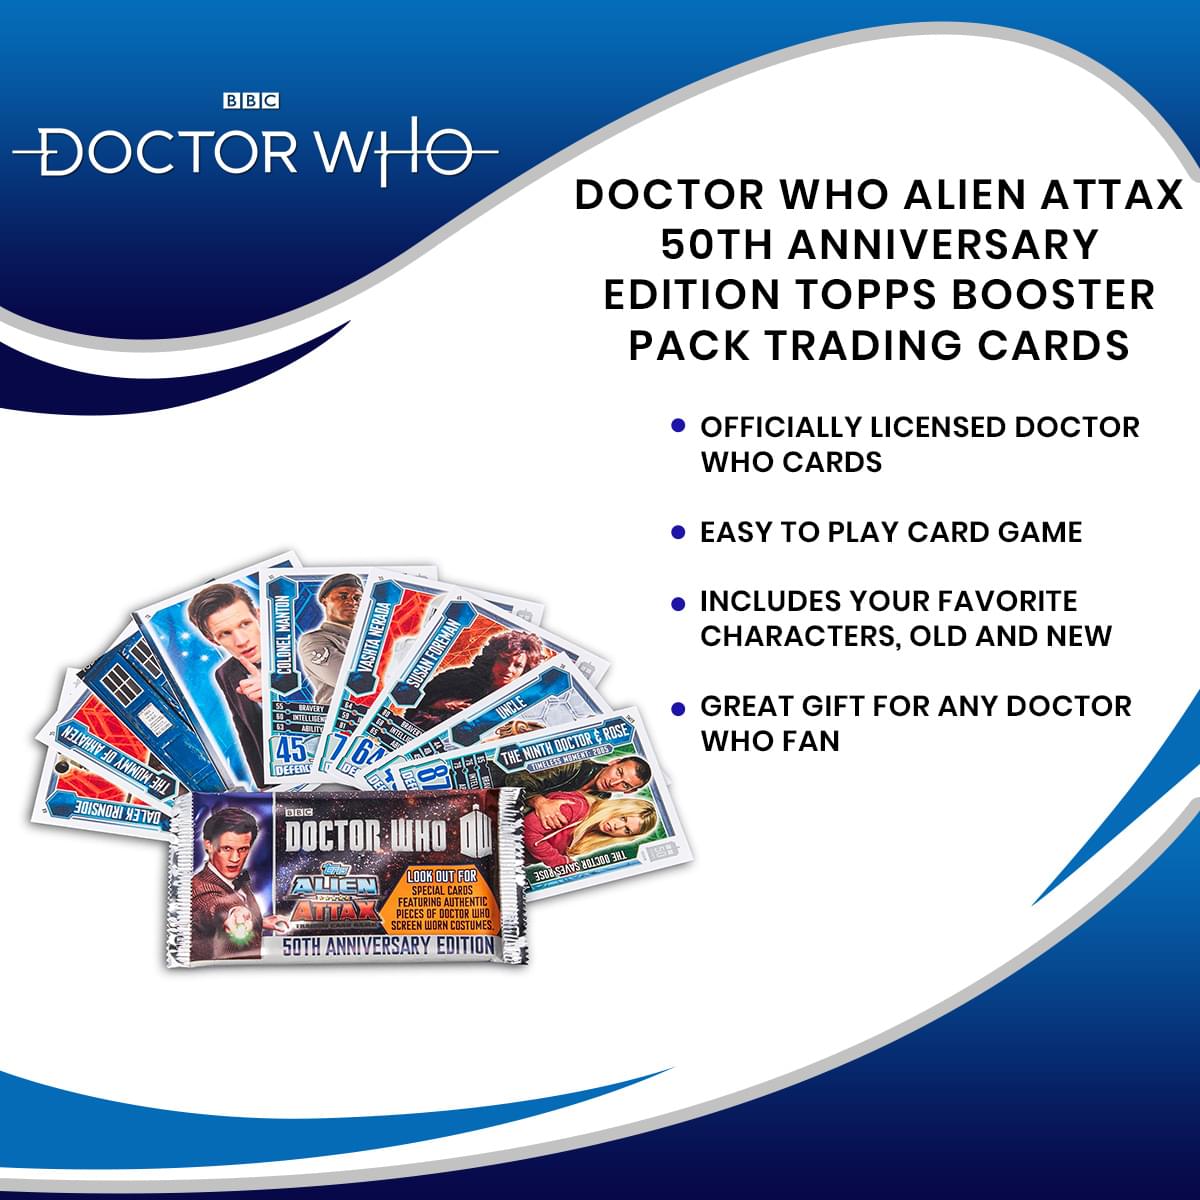 Doctor Who Alien Attax 50th Anniversary Edition Topps Booster Pack Trading Cards